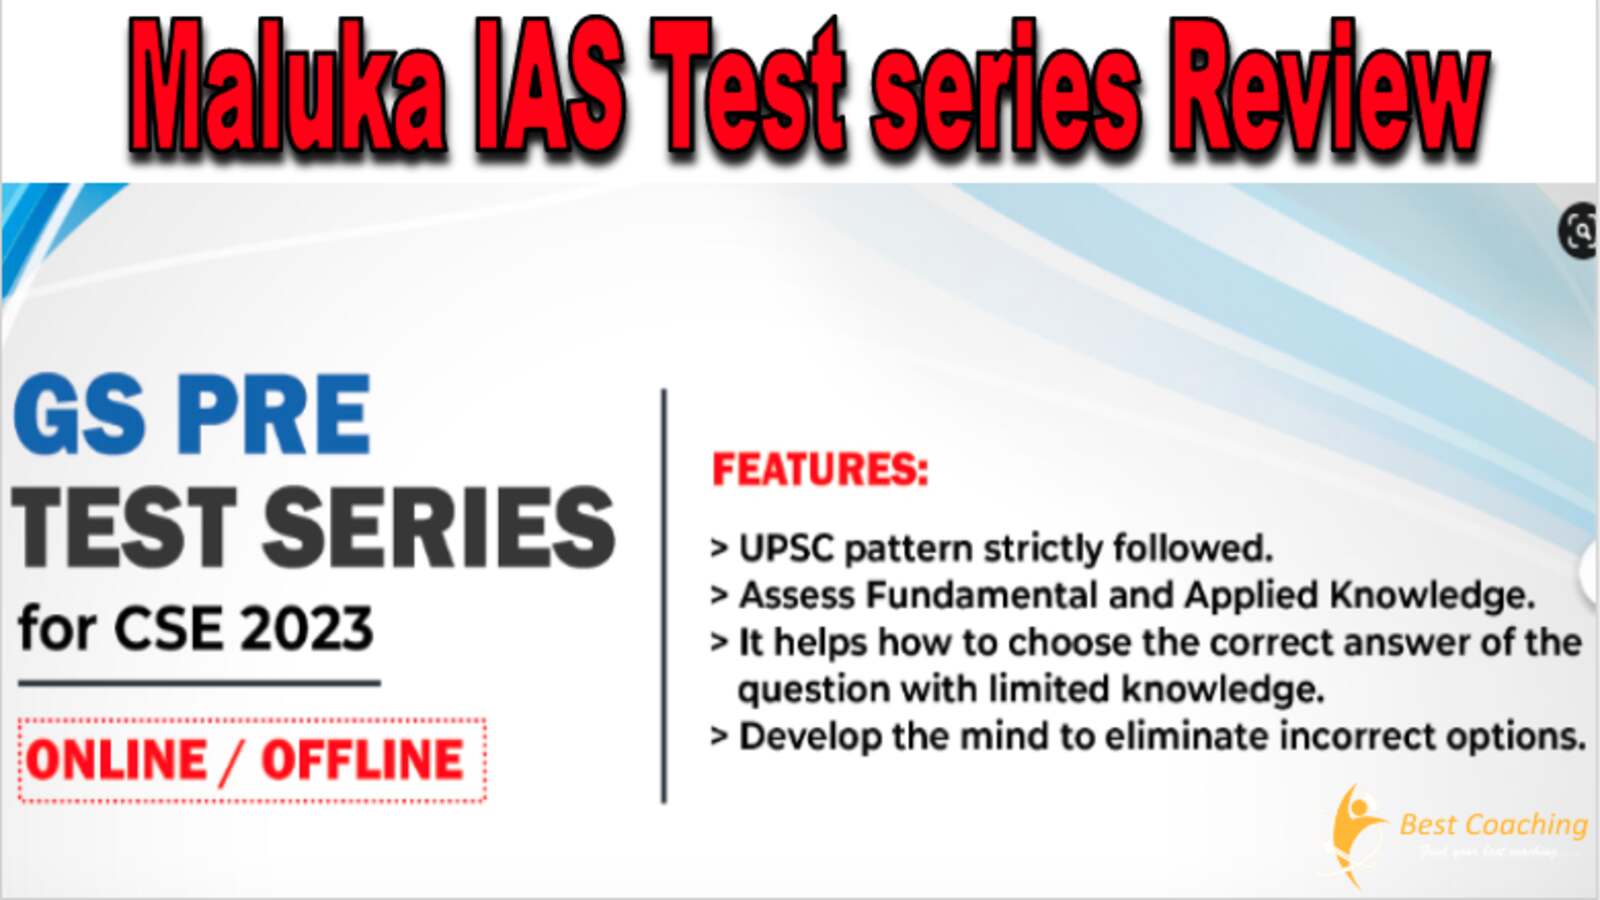 Maluka IAS Test Series Review